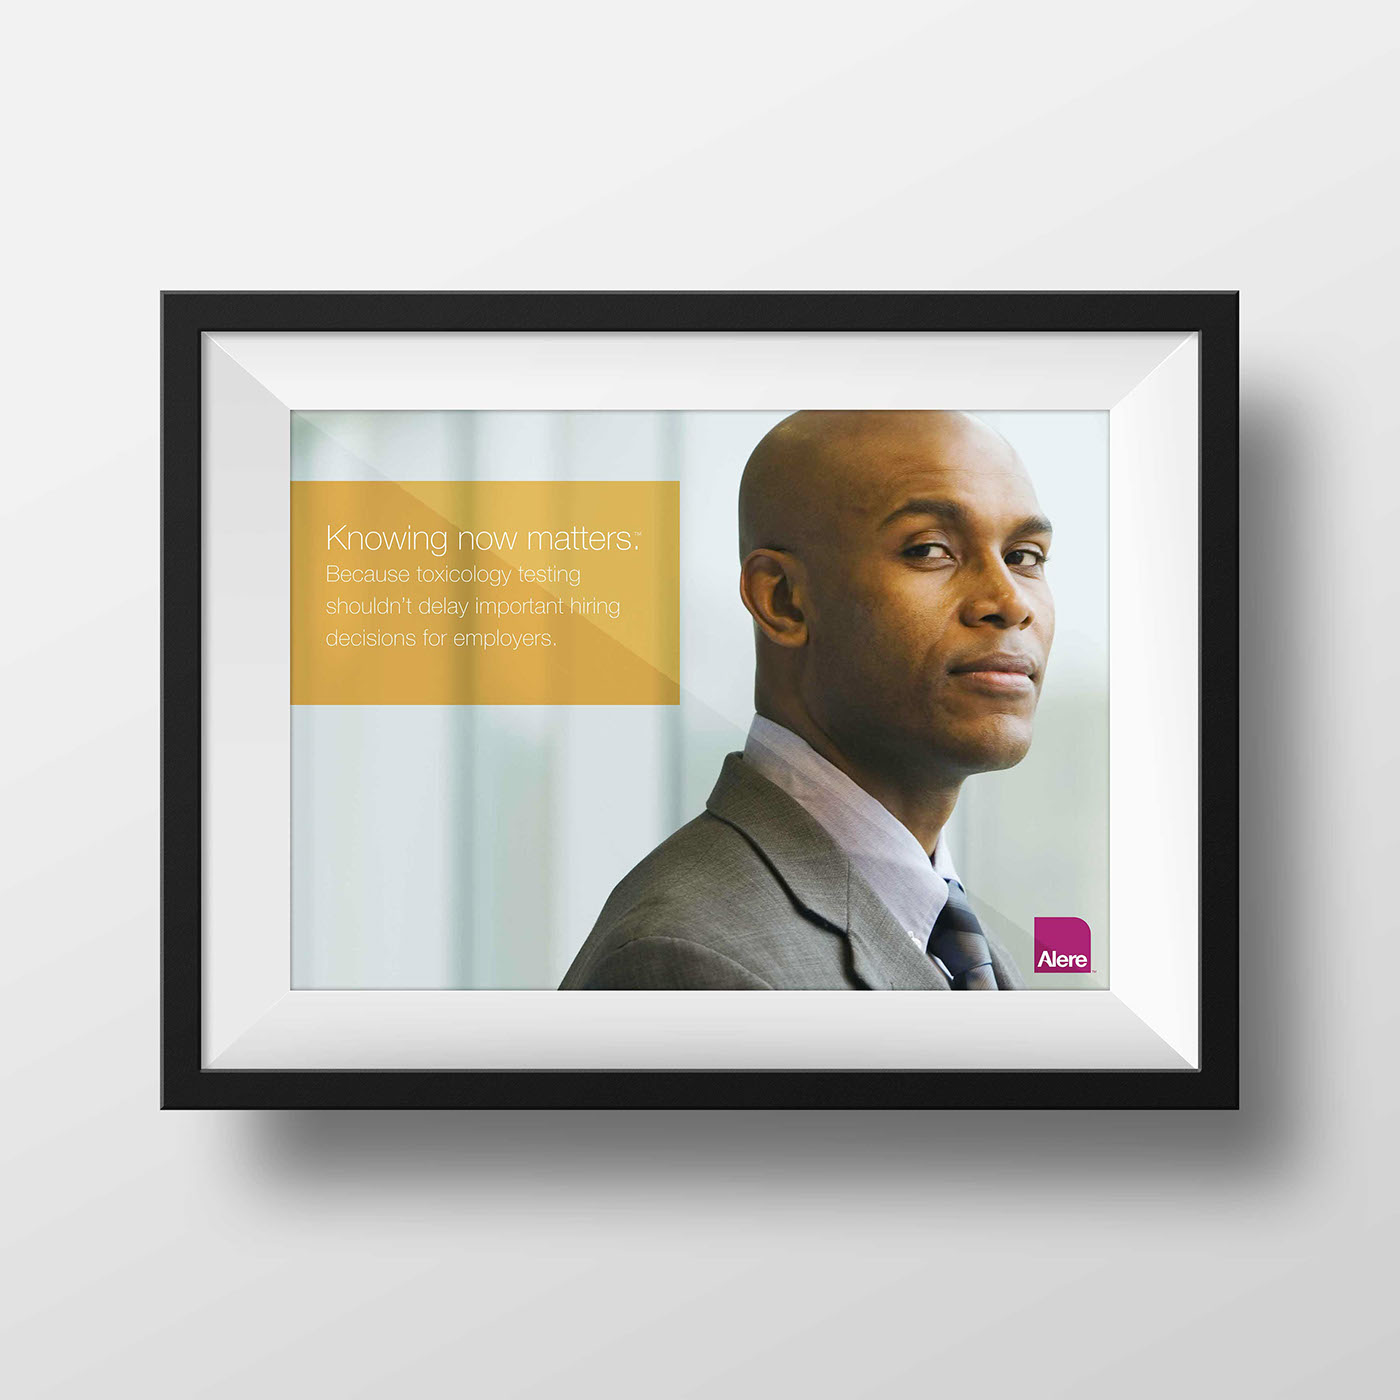 Alere corporate plexiframe Wall hangings InDesign frames